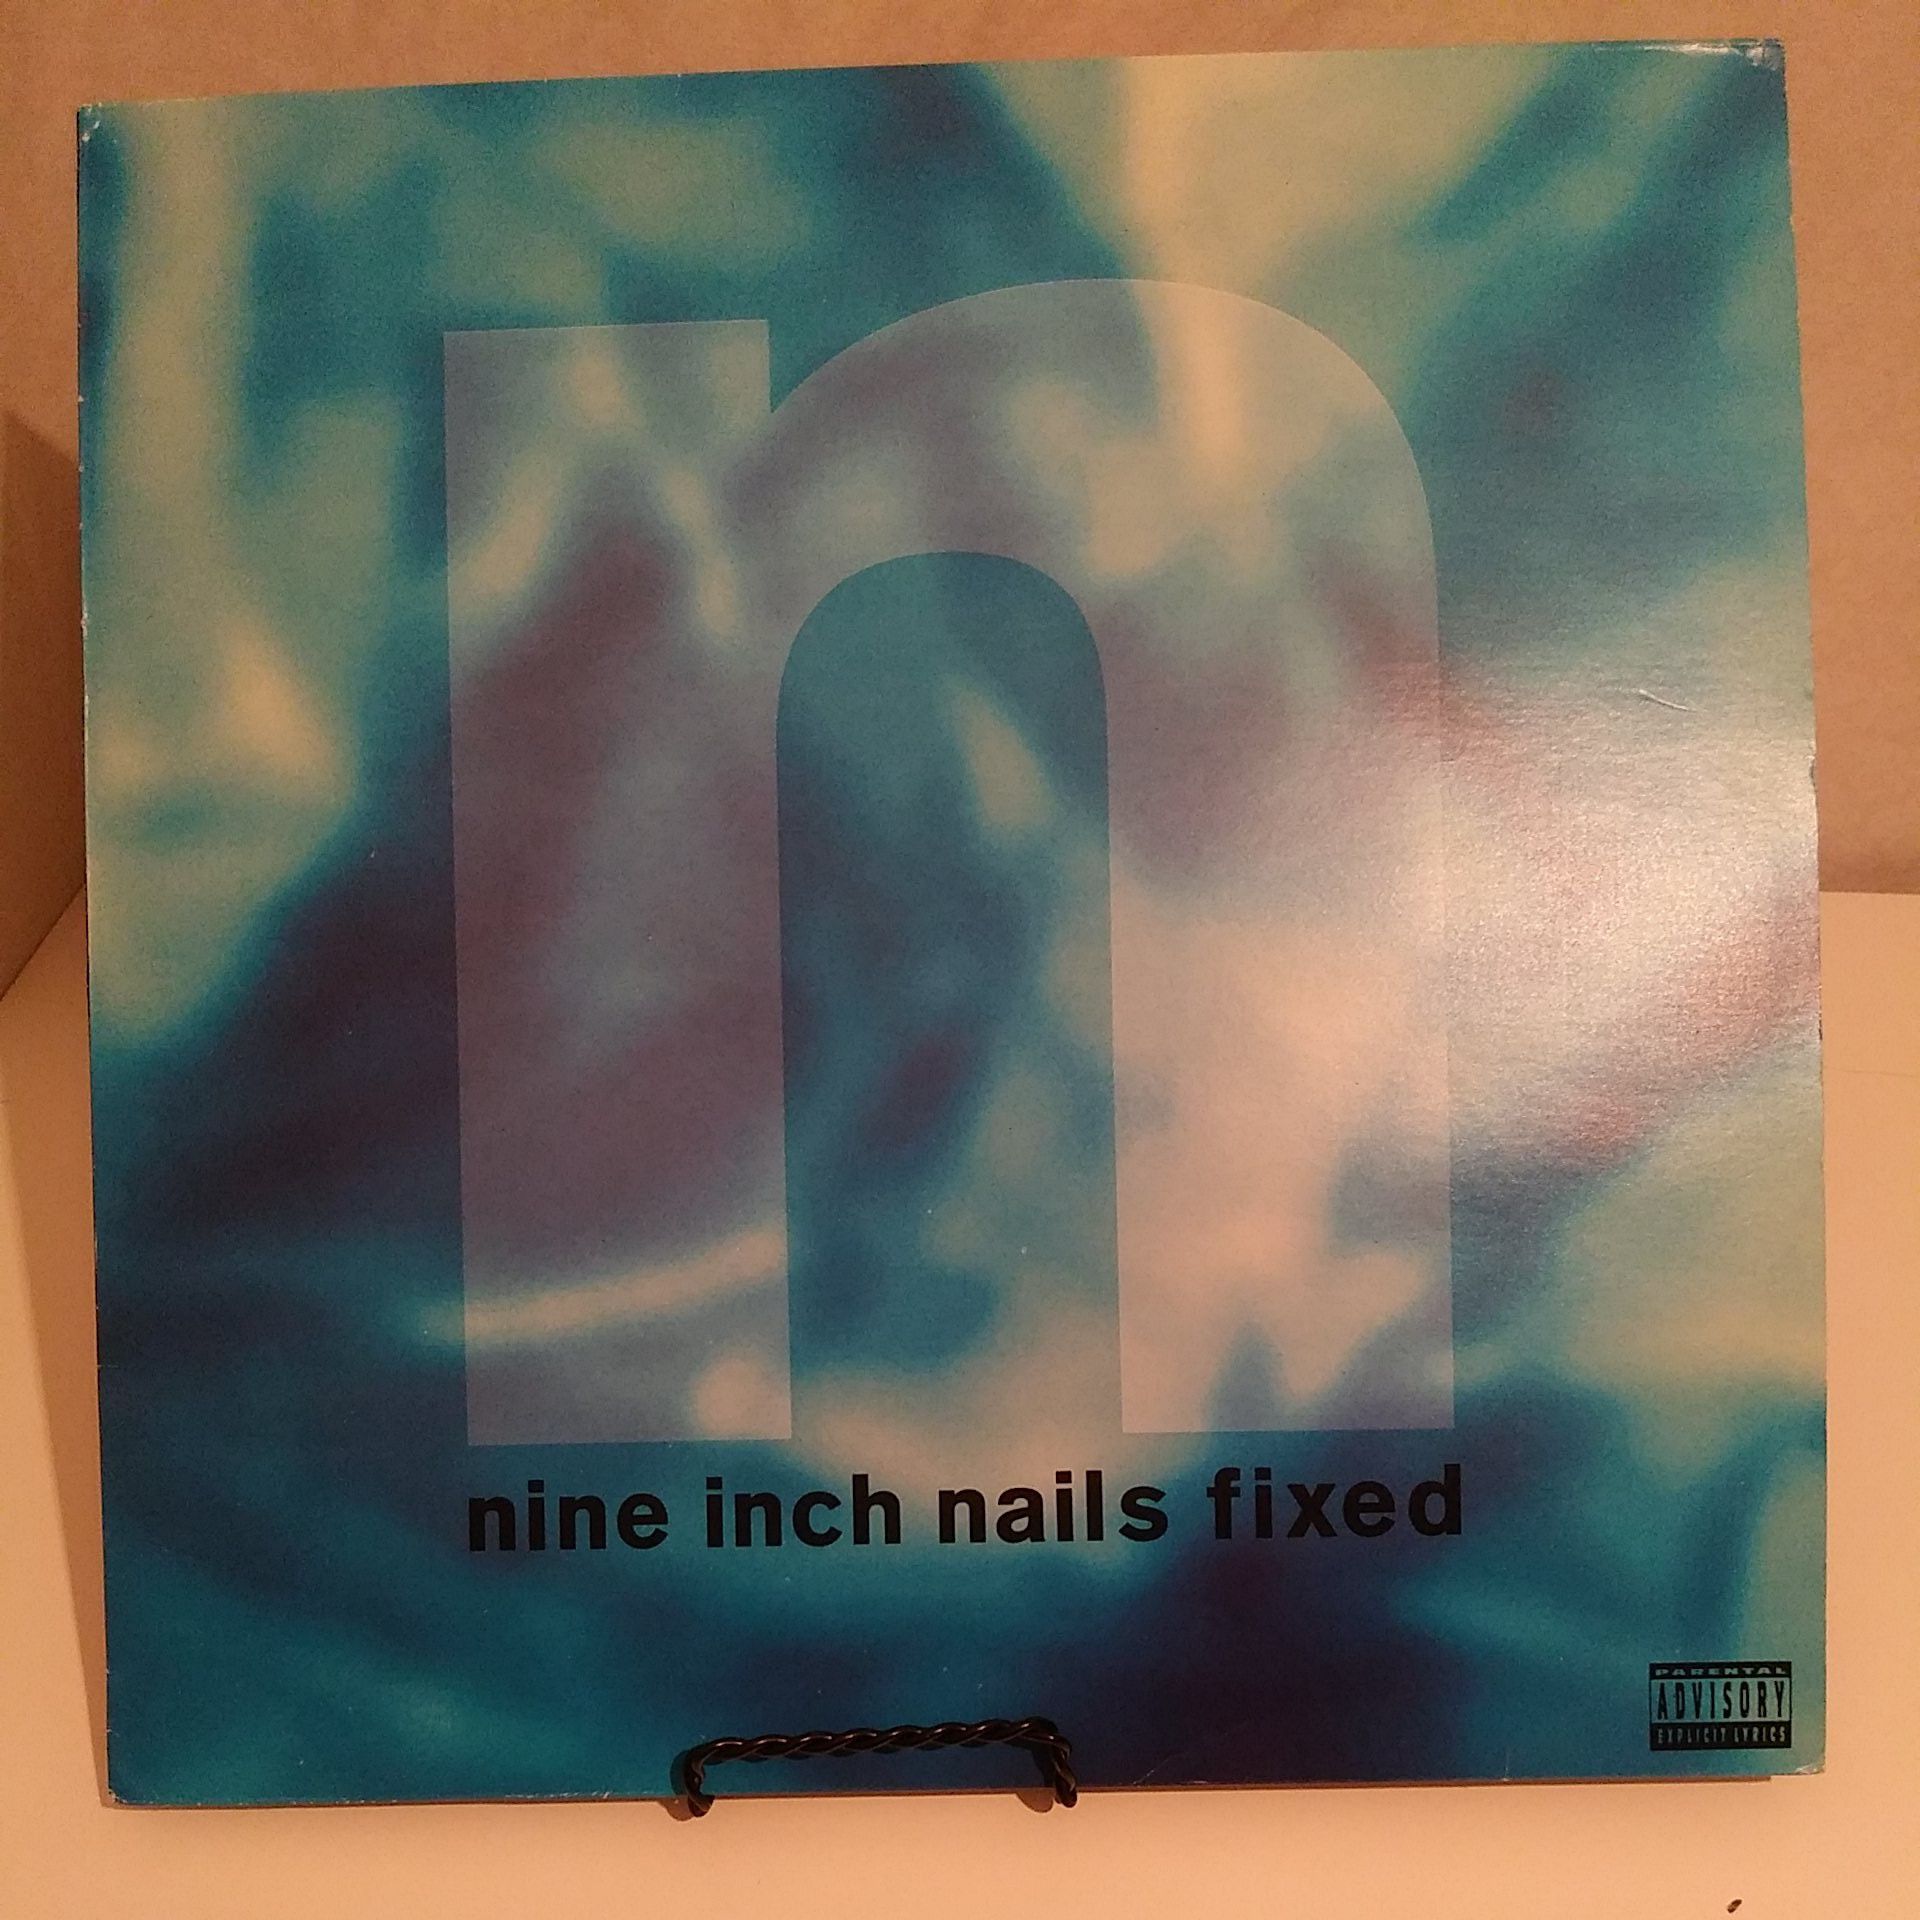 Nine Inch Nails - Fixed - Vinyl/Lp/Record - Excellent Condition